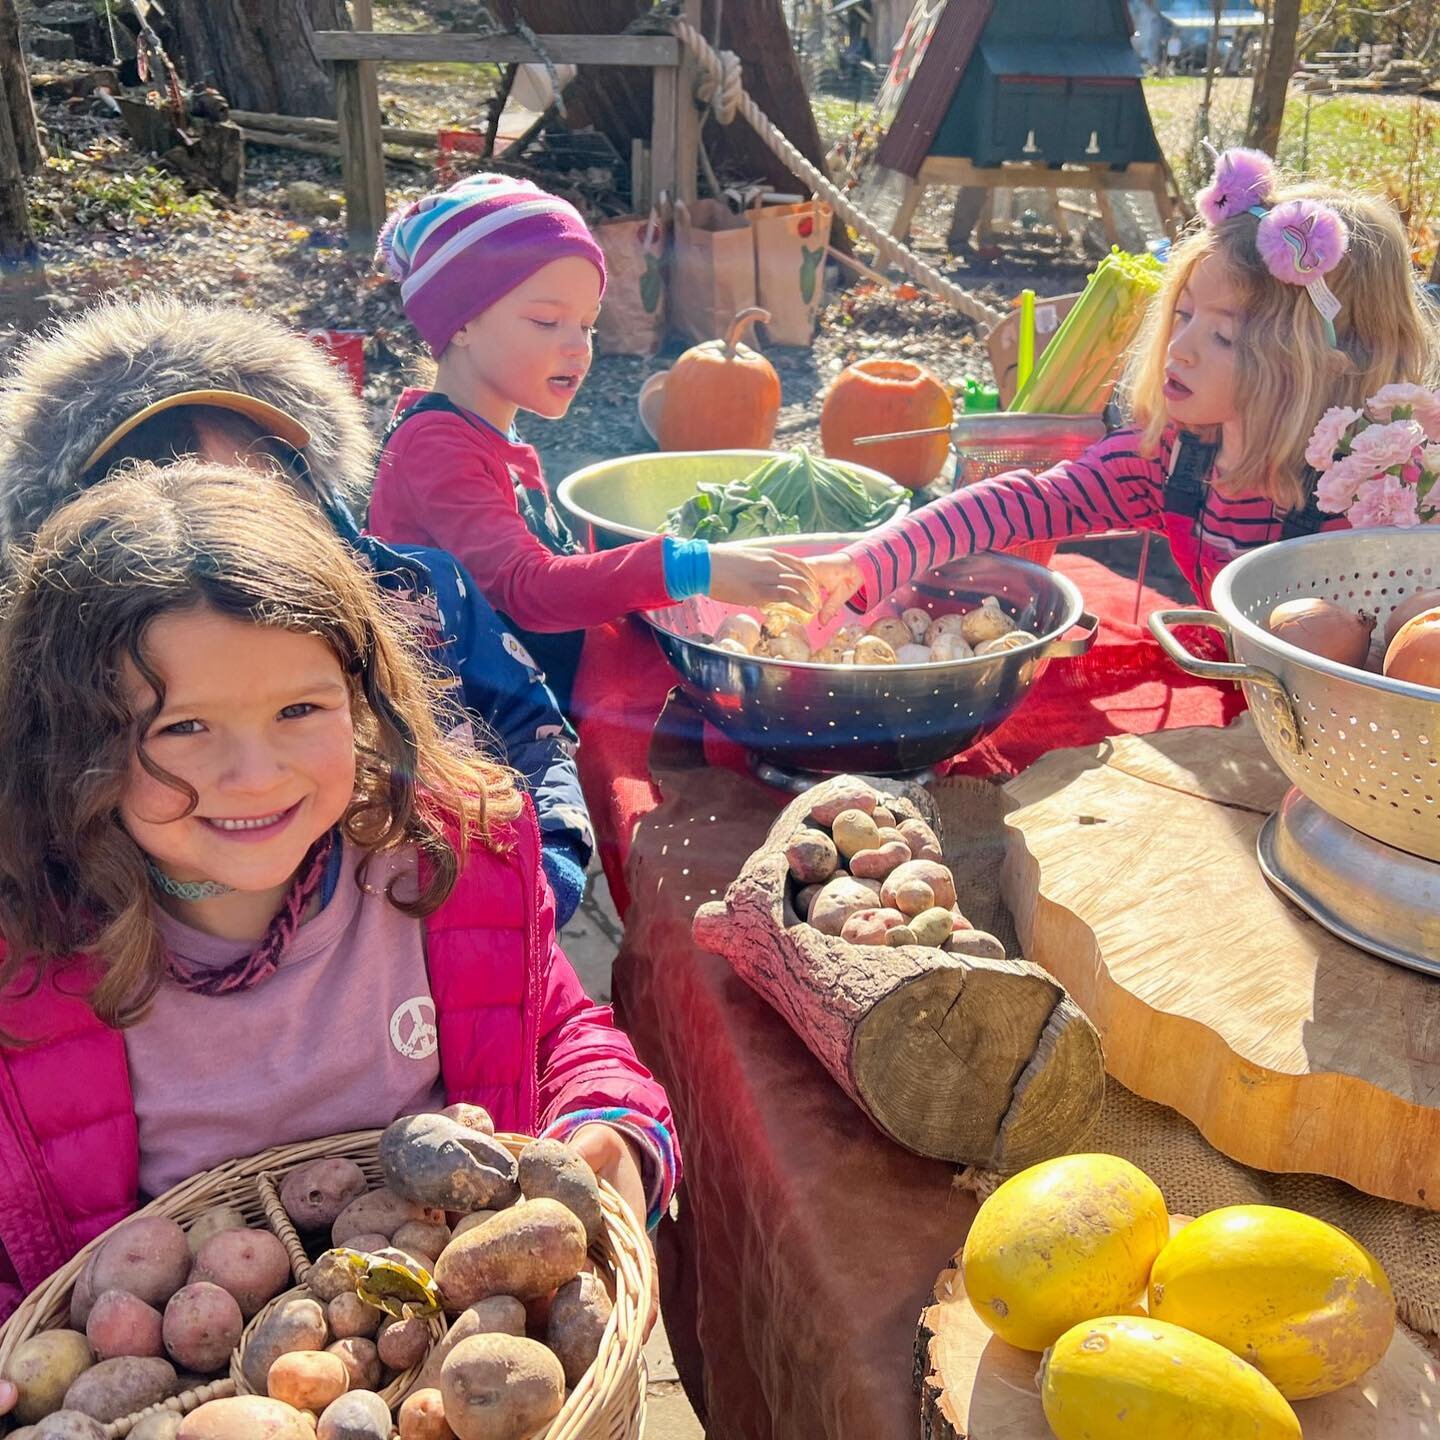 Another school tradition has arrived, as we celebrate our Randolph harvest as a community, enjoying a big feast, collaboratively prepared by everyone, including the friends who planted the seeds last spring. While we peel, chop, cook, and eat, we&rsq